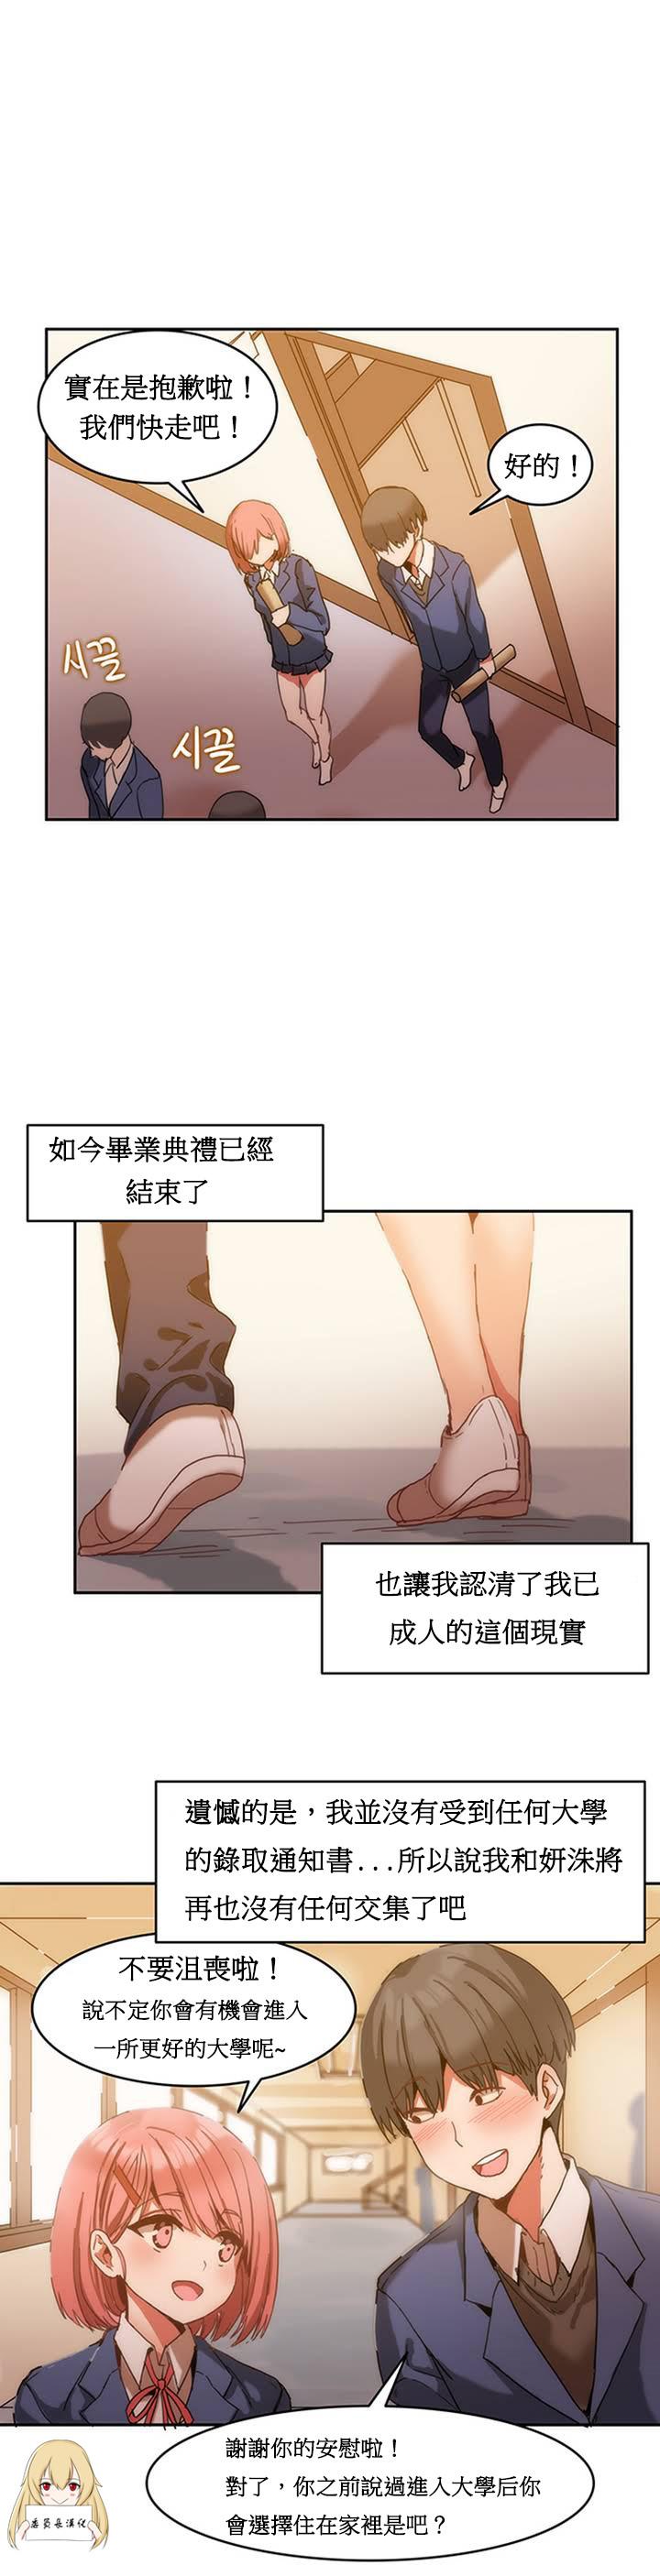 Transgender Hahri's Lumpy Boardhouse Ch. 0~21【委員長個人漢化】（持續更新） Hand - Page 6